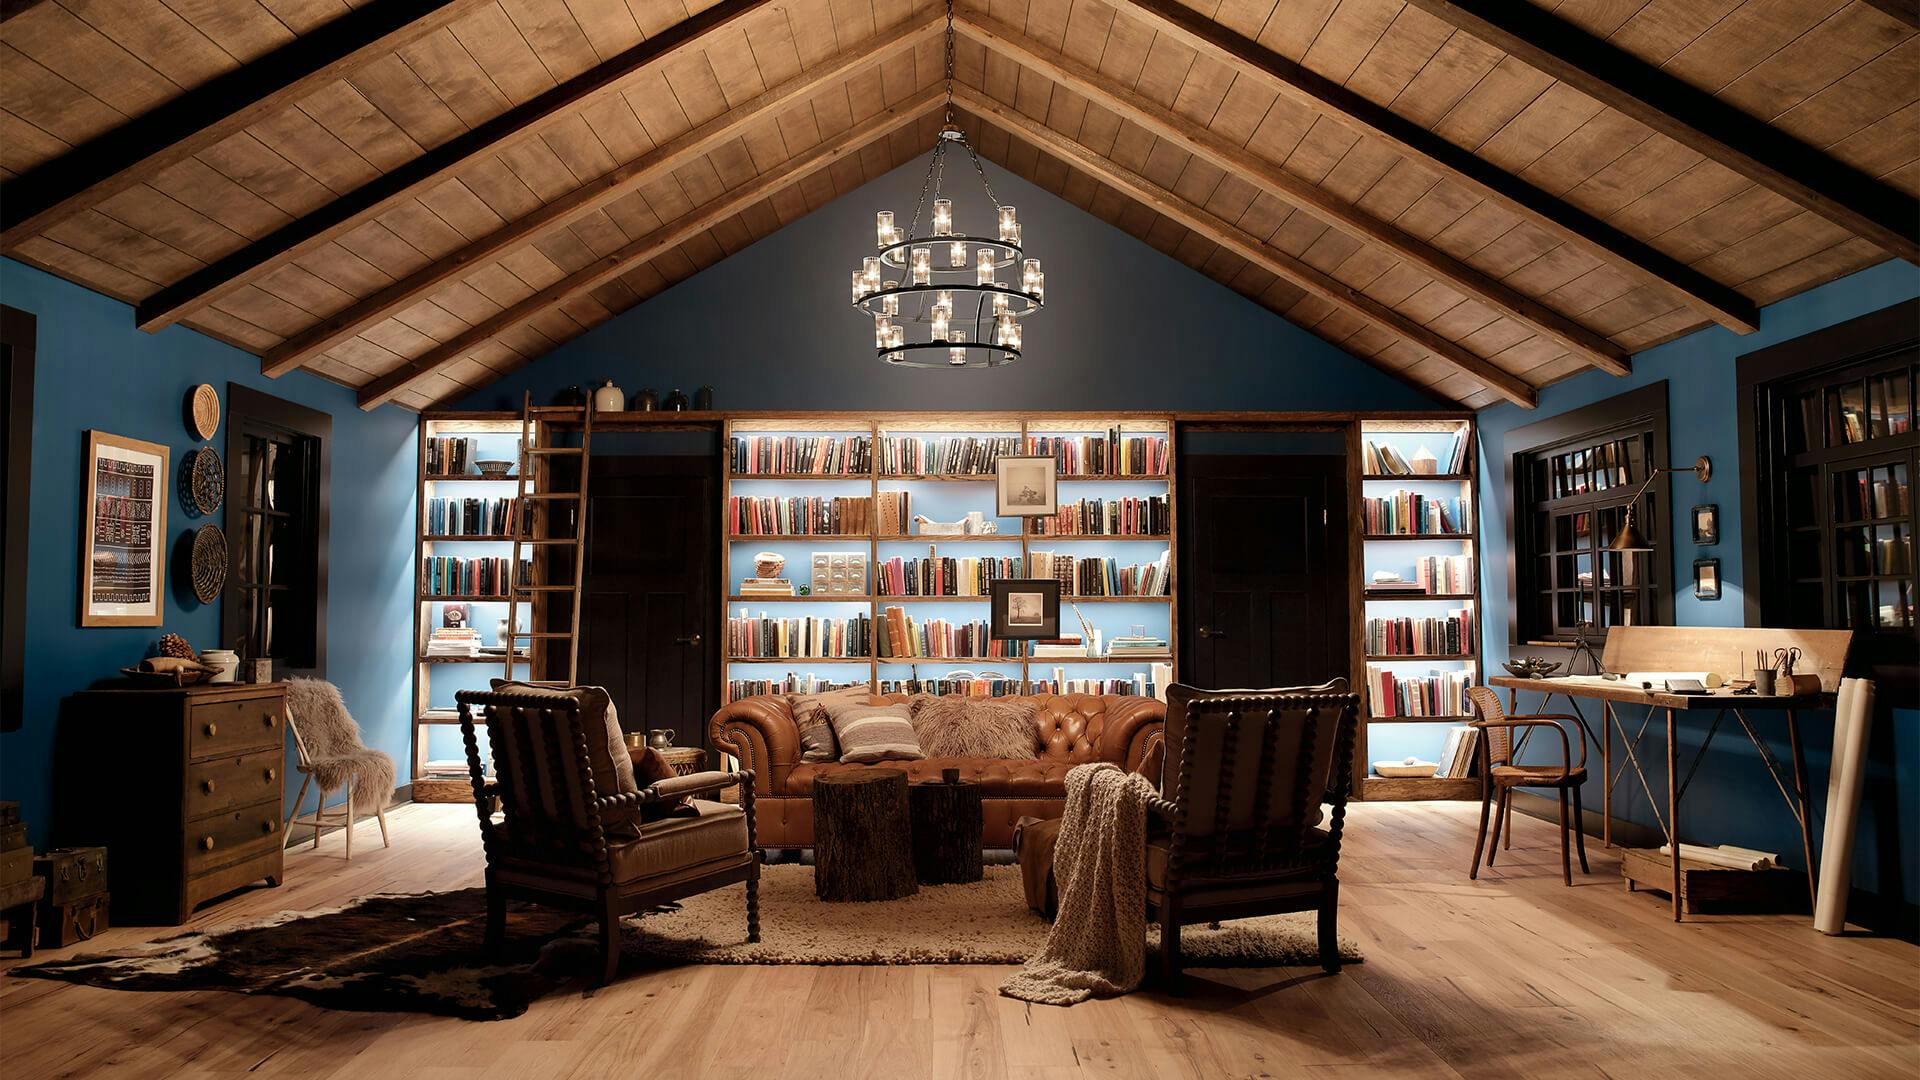 A south western style library den lit up by a Mathias chandelier with tapelights lighting up the book shelves on the back wall at night